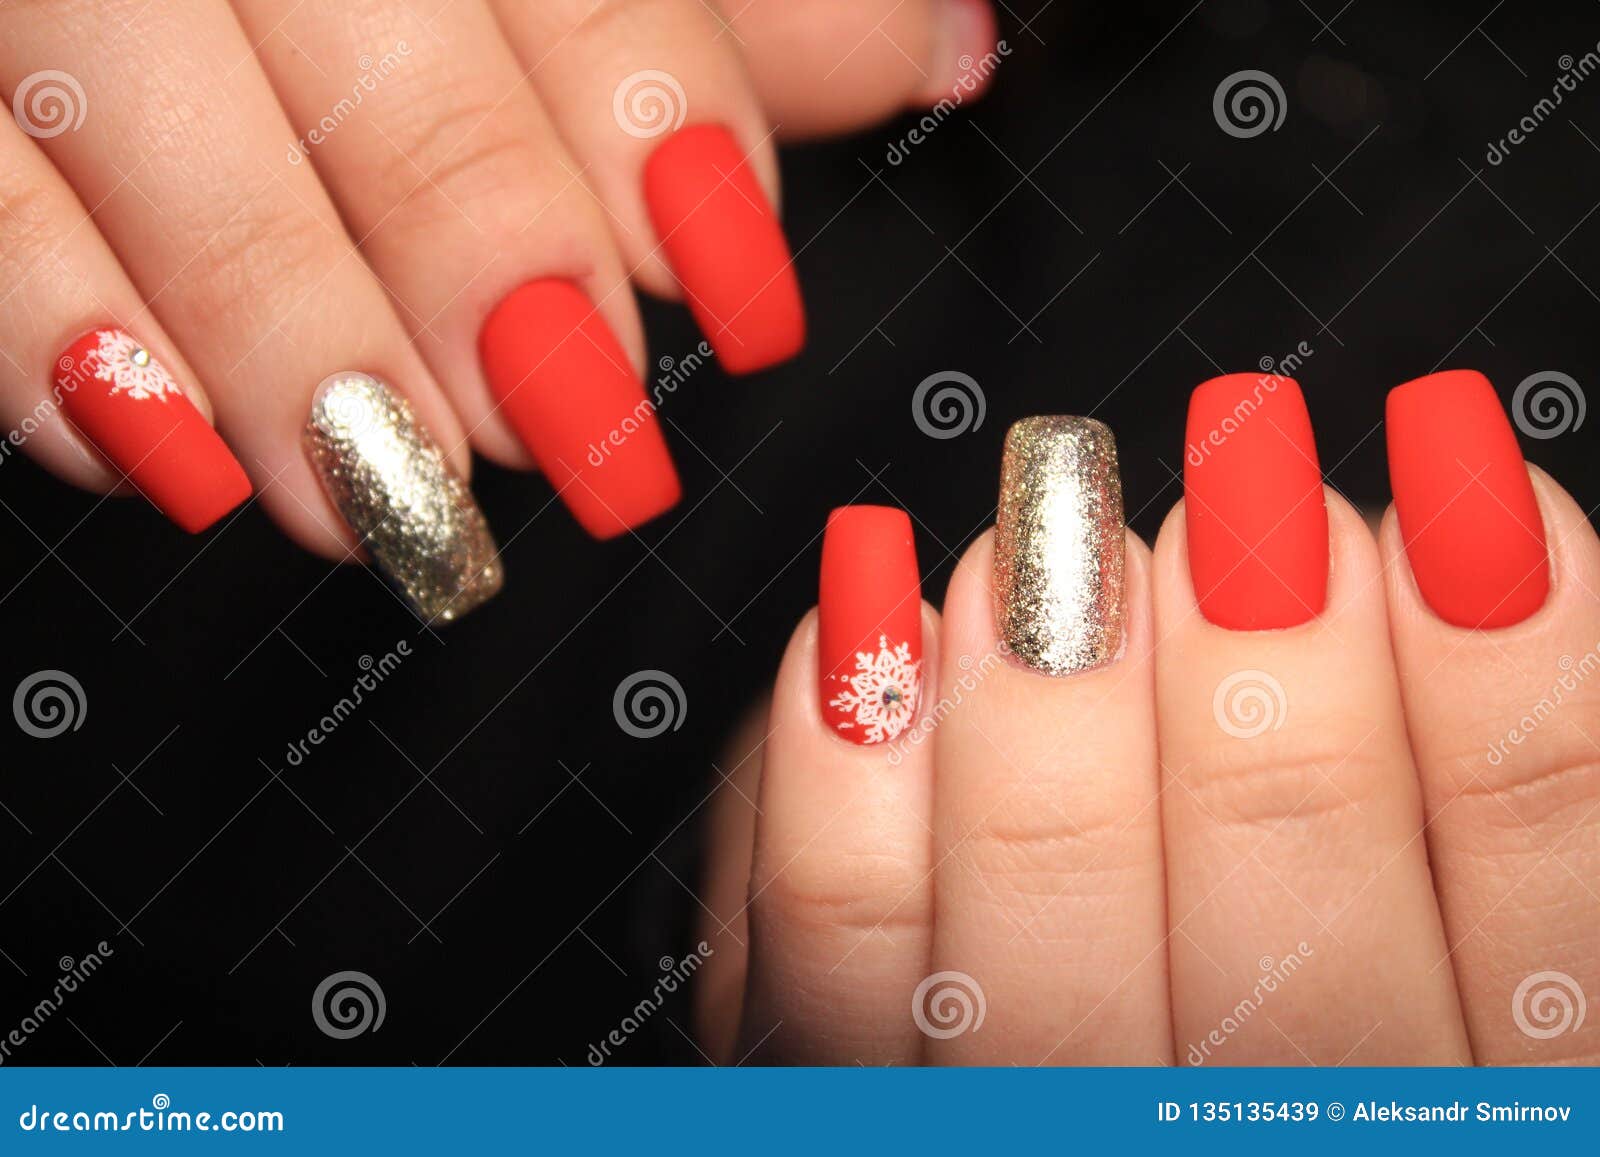 Winter Nail Designs with Rhinestones and Glitter - wide 8